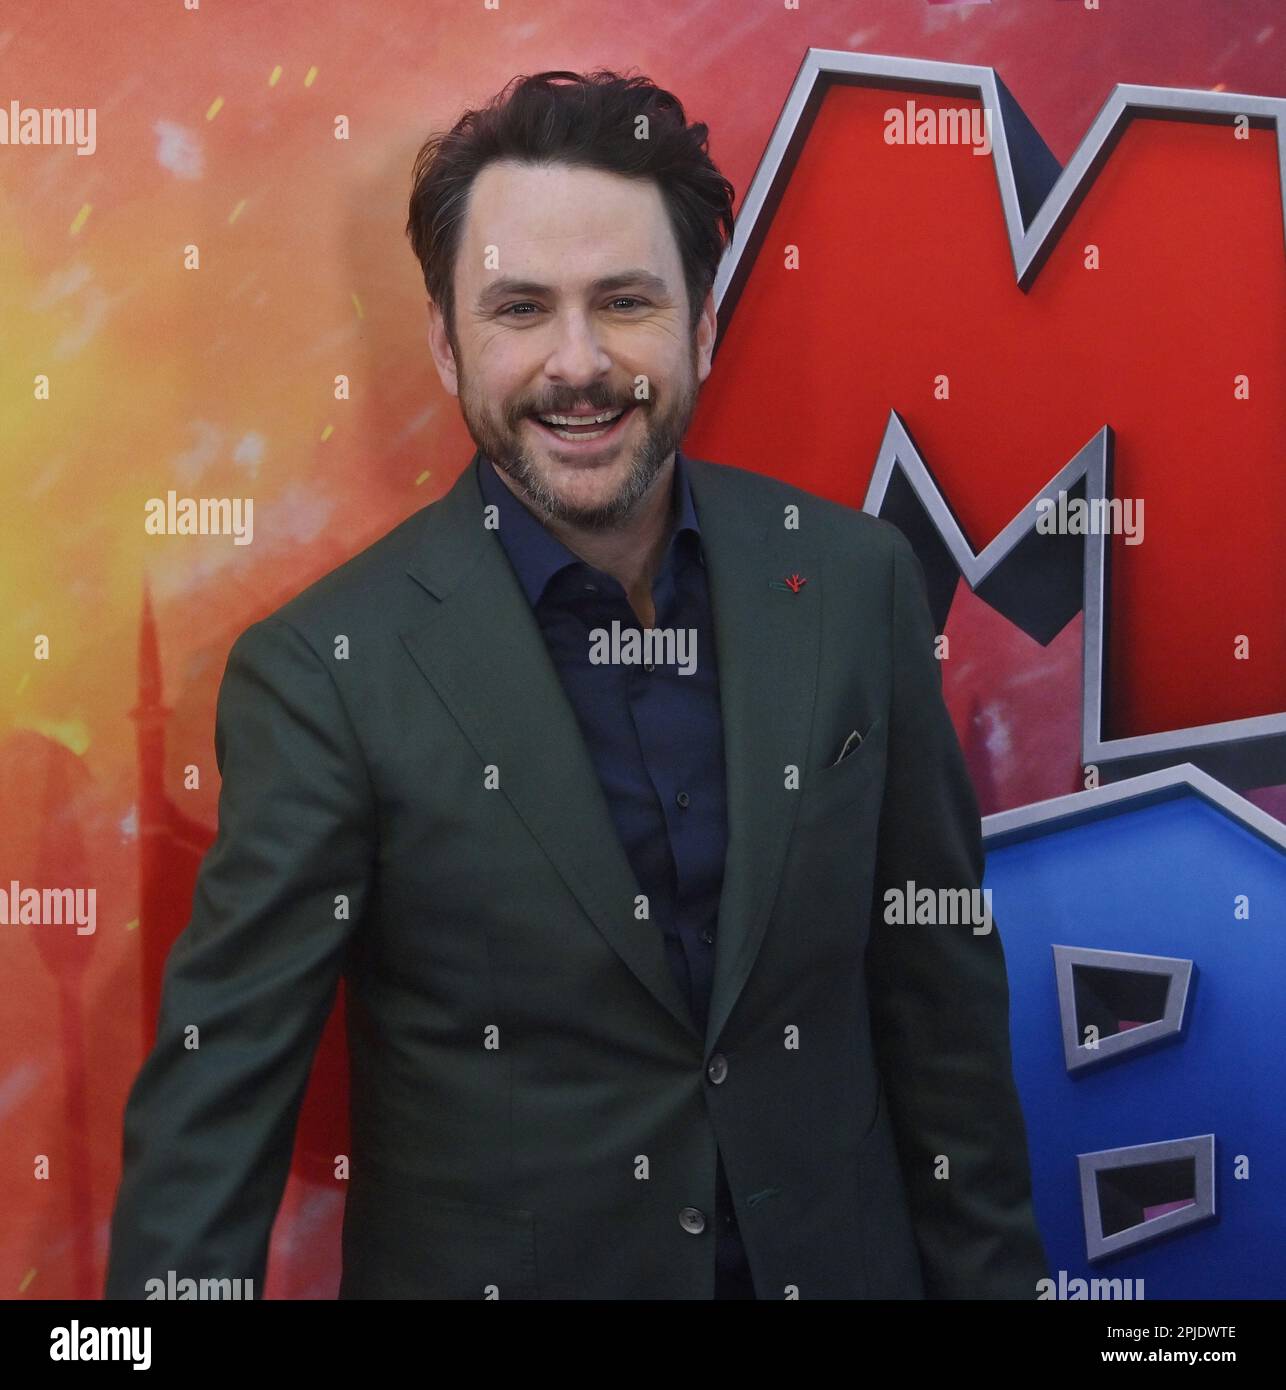 Los Angeles, United States. 01st Apr, 2023. Cast member Charlie Day, the voice of Luigi attends the premiere of the animated sci-fi fantasy comedy motion picture 'The Super Mario Bros. Movie' at Regal L.A. Live in Los Angeles on Saturday, April 1, 2023. Storyline: A Brooklyn plumber named Mario travels through the Mushroom Kingdom with a princess named Peach and an anthropomorphic mushroom named Toad to find Mario's brother, Luigi, and to save the world from a ruthless fire-breathing Koopa named Bowser. Photo by Jim Ruymen/UPI Credit: UPI/Alamy Live News Stock Photo